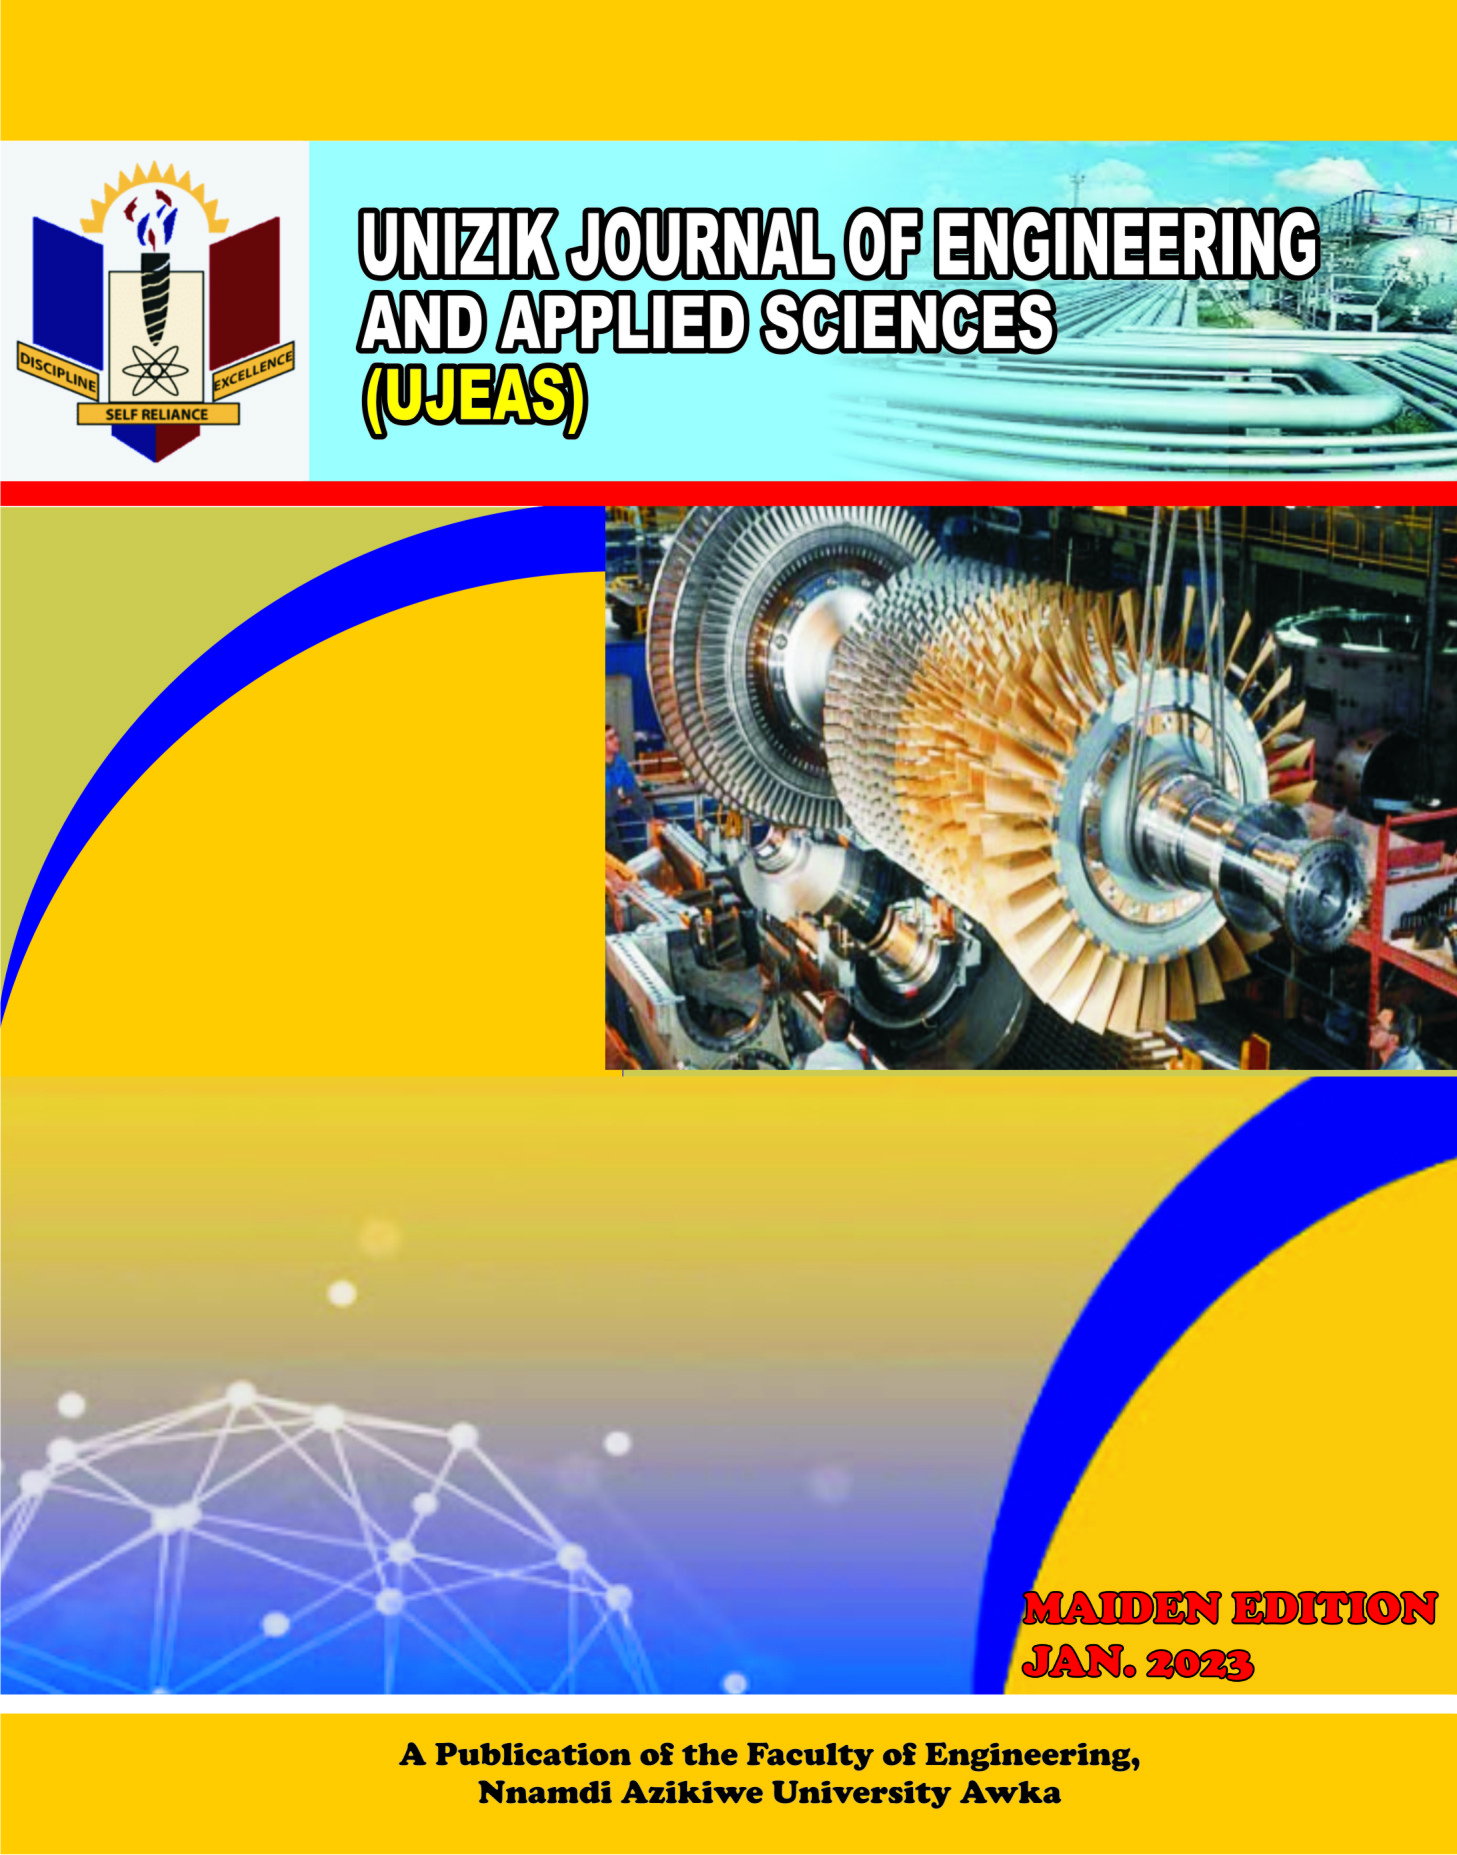 					View Vol. 1 No. 1 (2023): MAIDEN EDITION|UNIZIK Journal of Engineering and Applied Sciences
				